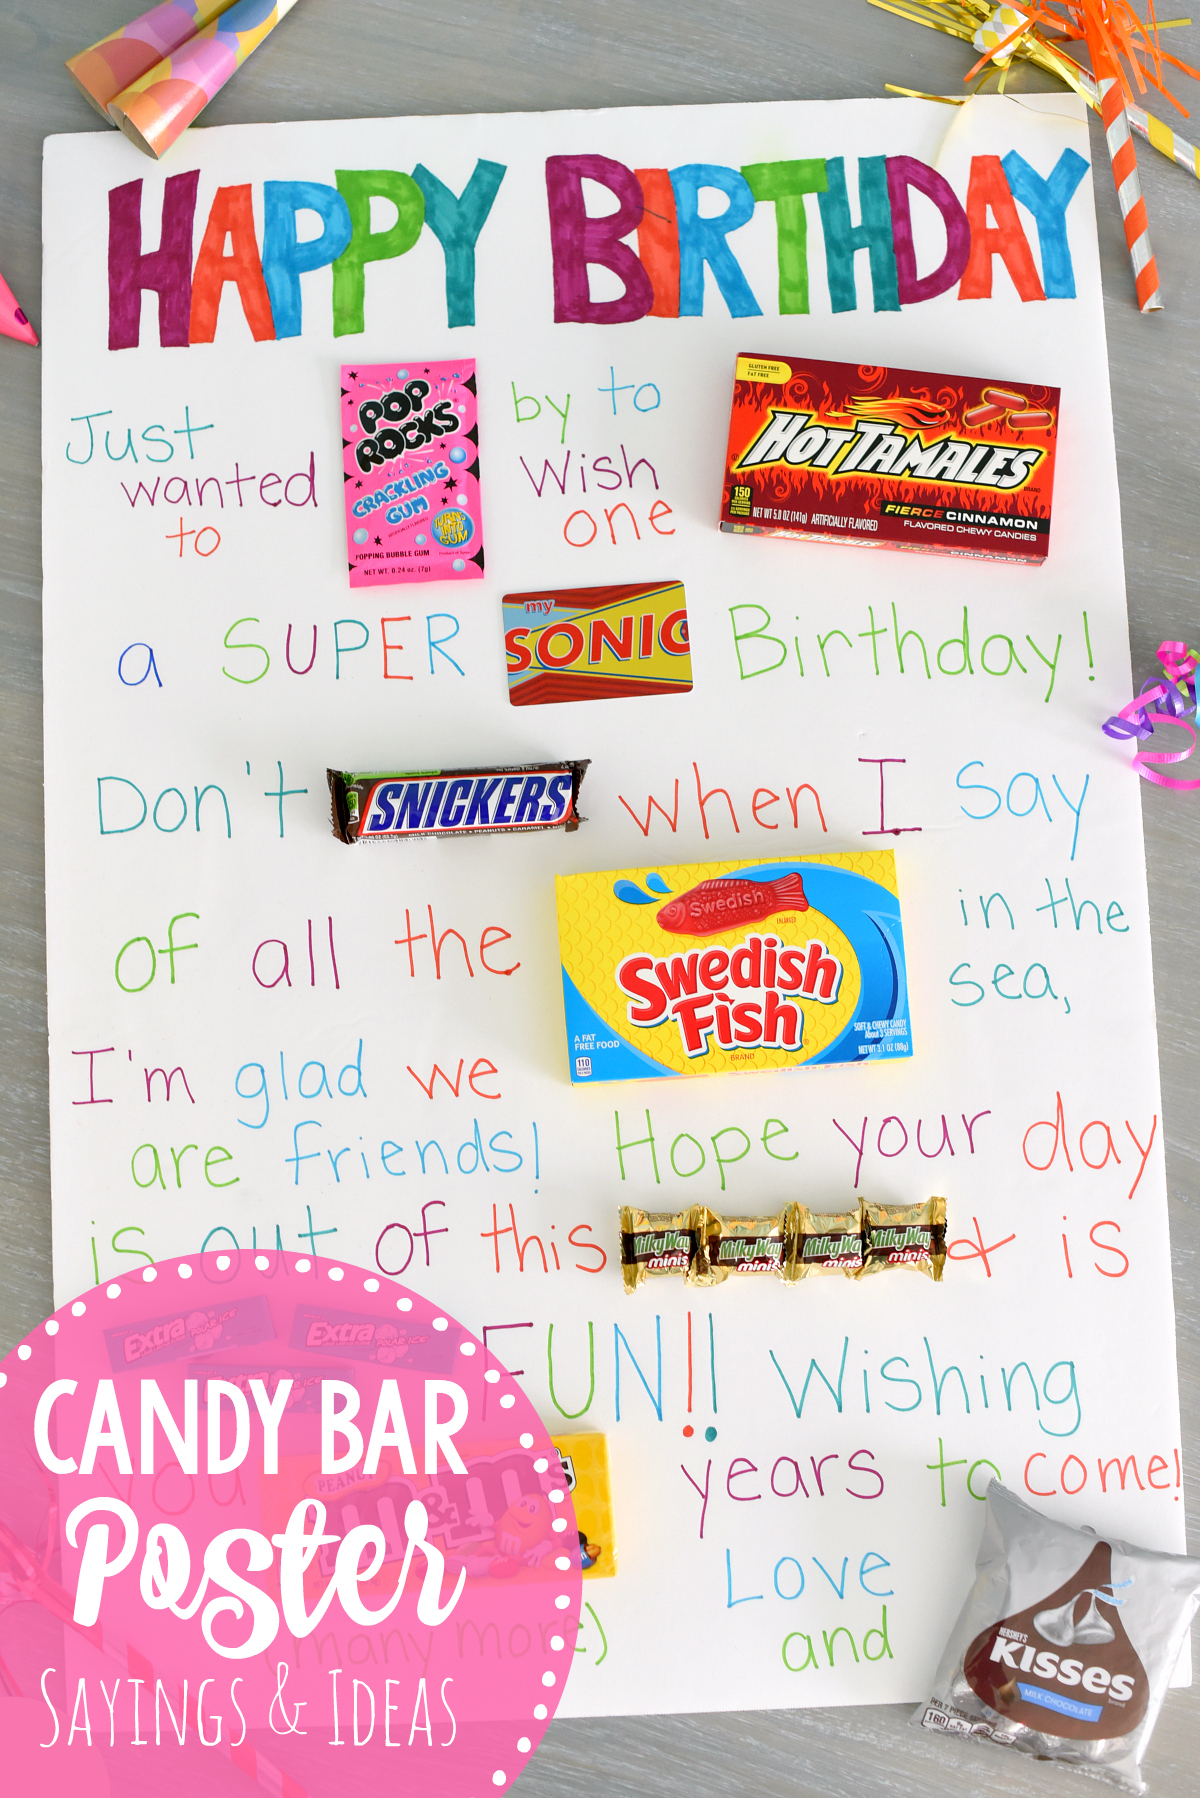 Candy Posters-Looking for ideas for a candy poster for a birthday? Use these ideas (and we have more) to put together a personalized one for someone you love! #birthday #birthdays #birthdaygift #gifts #birthdaygiftideas #happybirthday #candyposter #candy